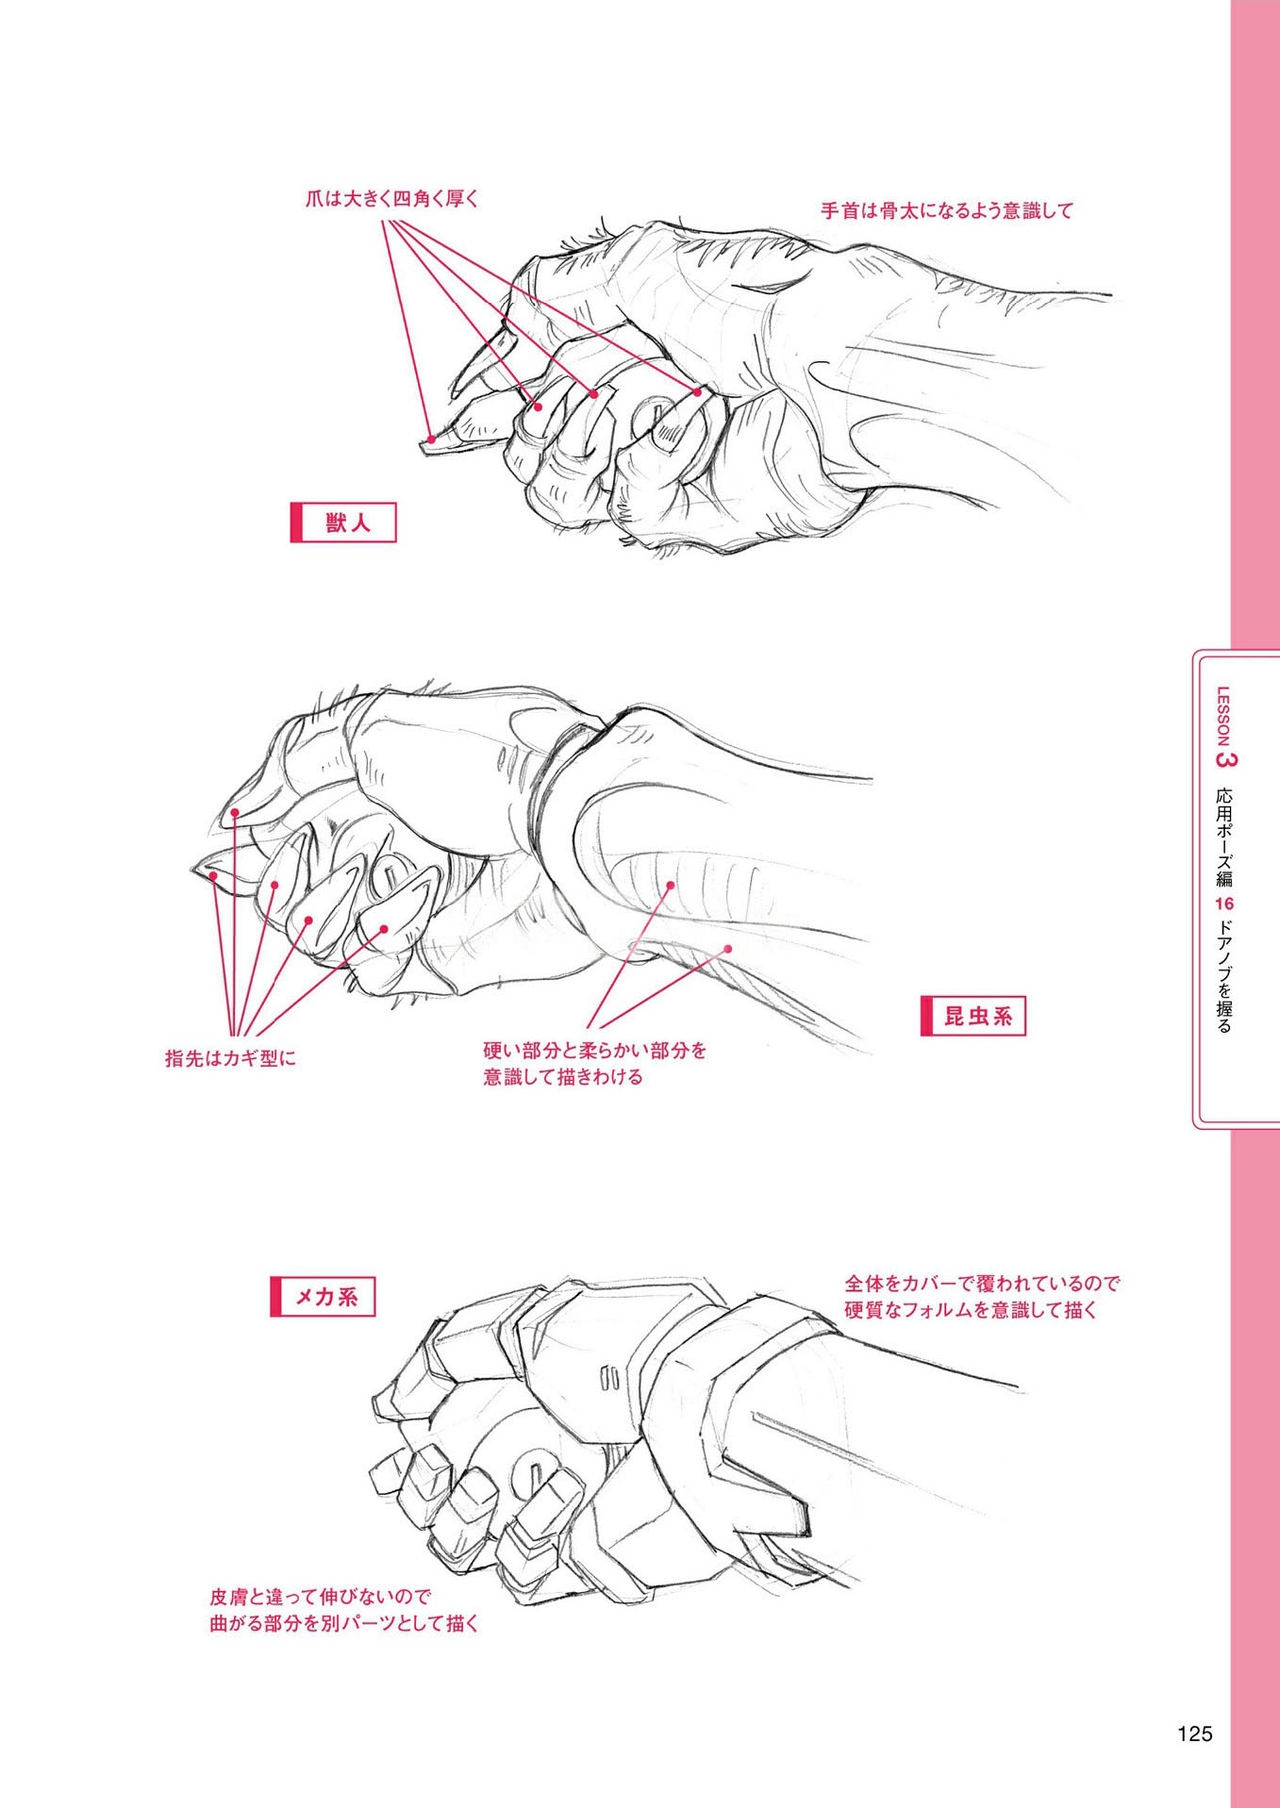 How to draw hands 125